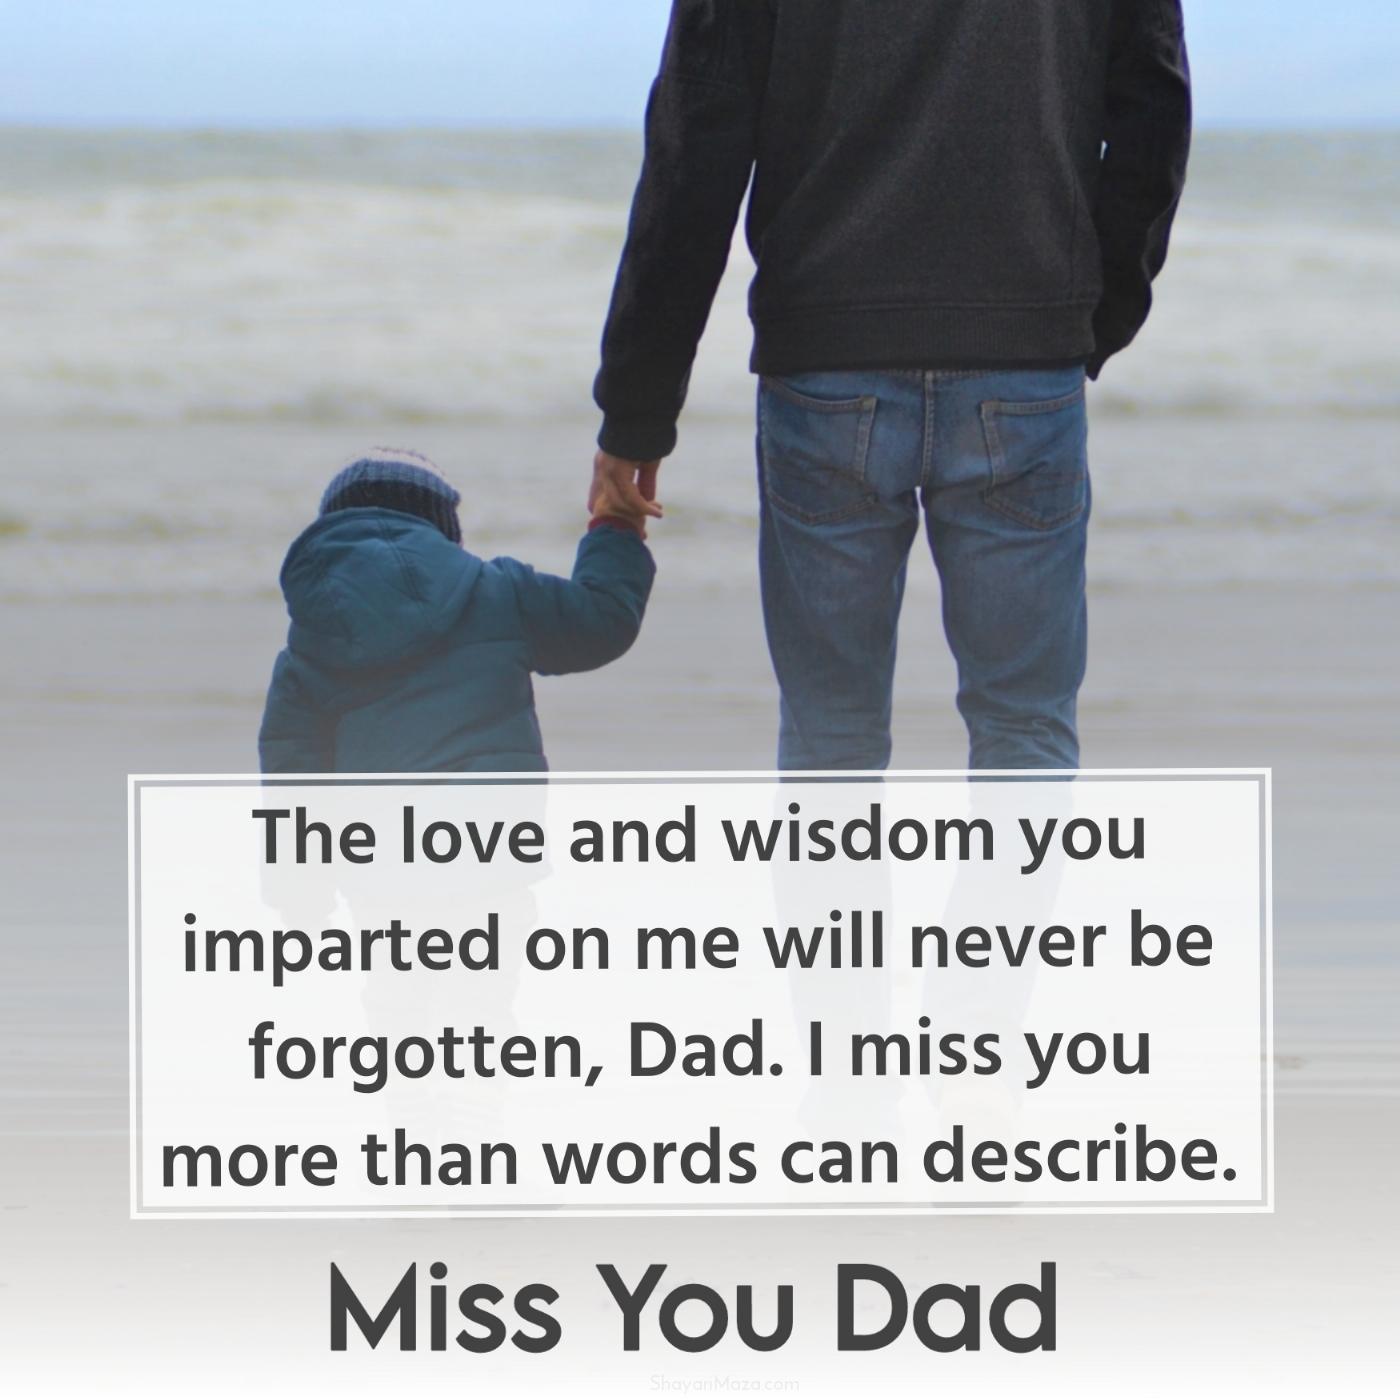 The love and wisdom you imparted on me will never be forgotten Dad